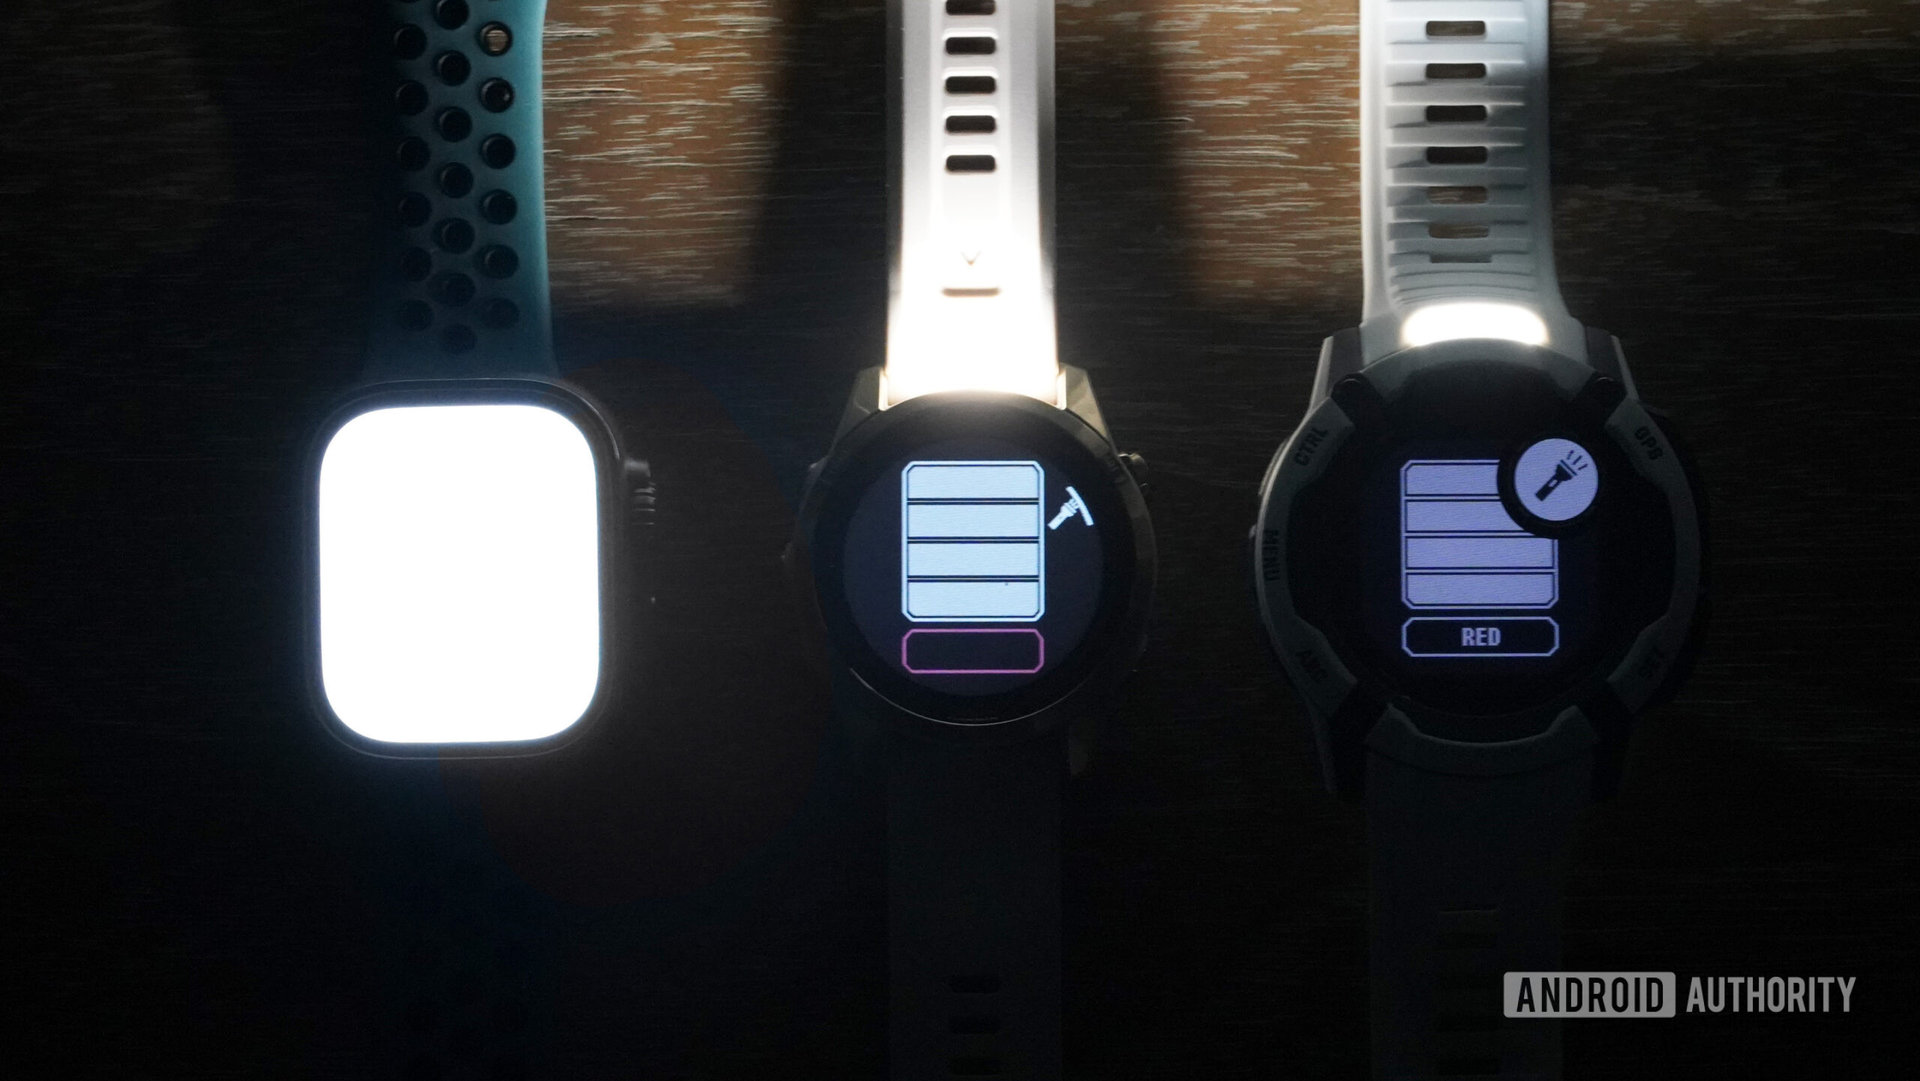 An Apple Watch Ultra rests alongside two Garmin devices, all with their respective flashlights enabled.